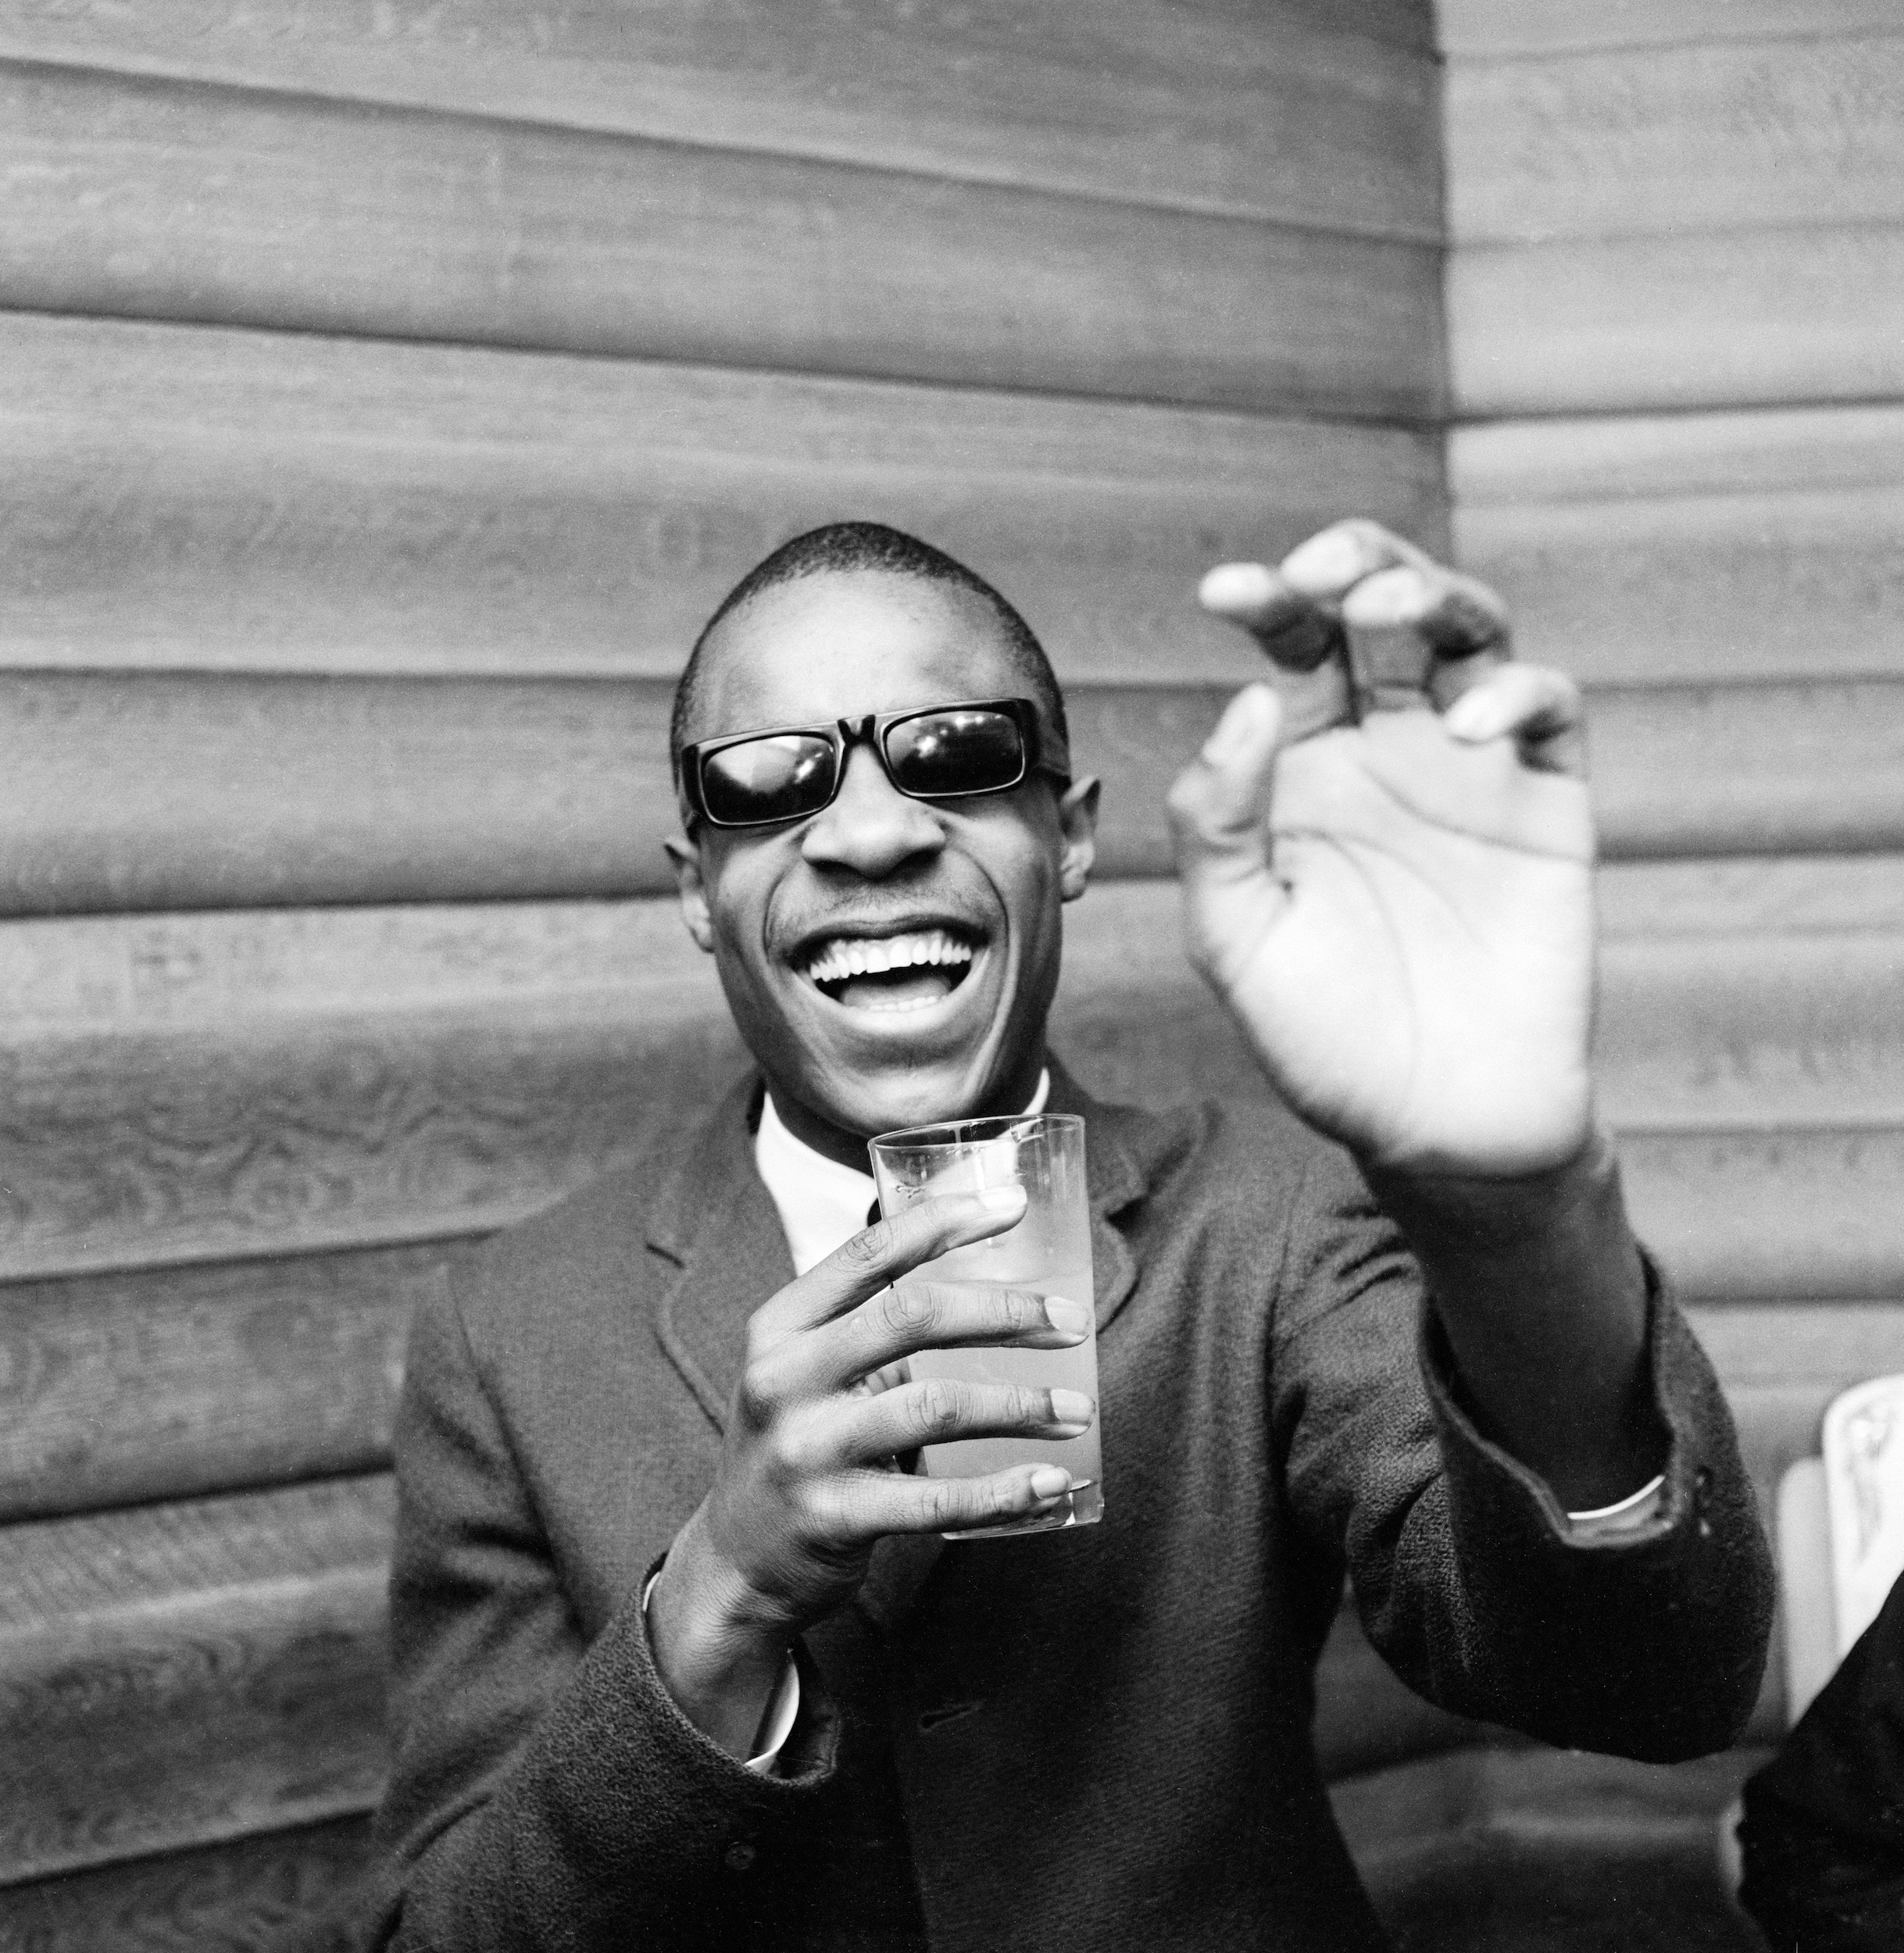 Stevie Wonder in London in early 1966, promoting his latest release, “Uptight (Everything’s Alright).” It became the musician’s first British chart success, part of his total Motown tally of 25 Top 20 hits over the next 20 years. Photo: Courtesy of EMI Group Archive Trust